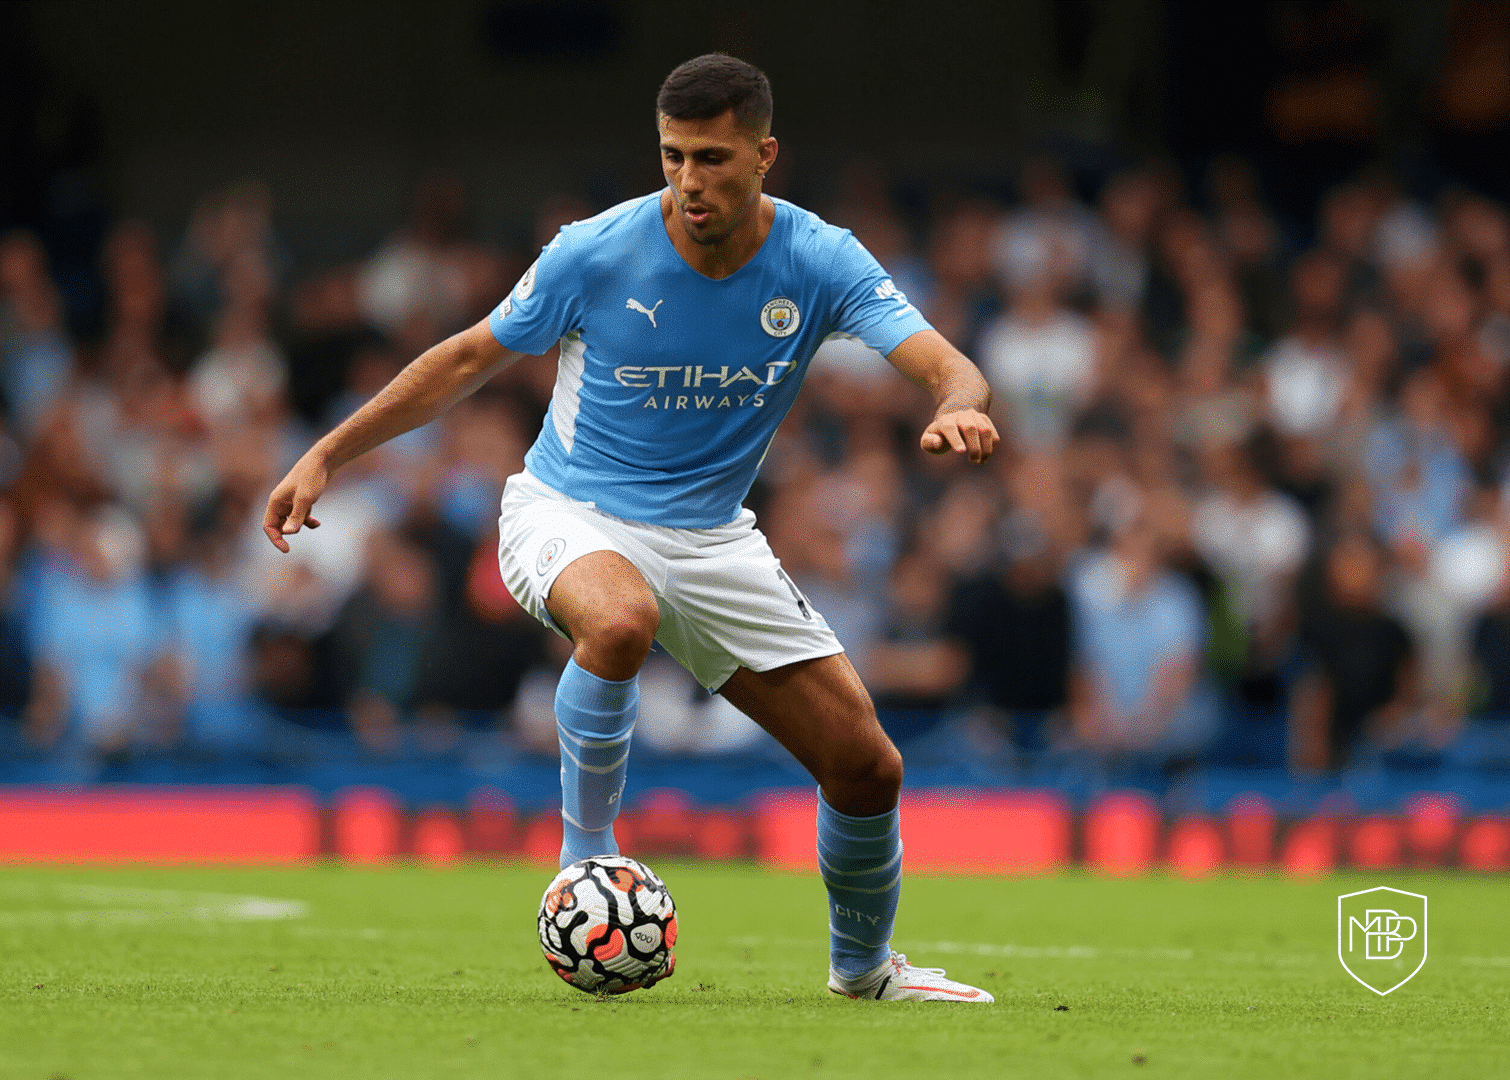 You are currently viewing RODRI: WE ANALYZE 3 CHARACTERISTICS OF THE MANCHESTER CITY PLAYER